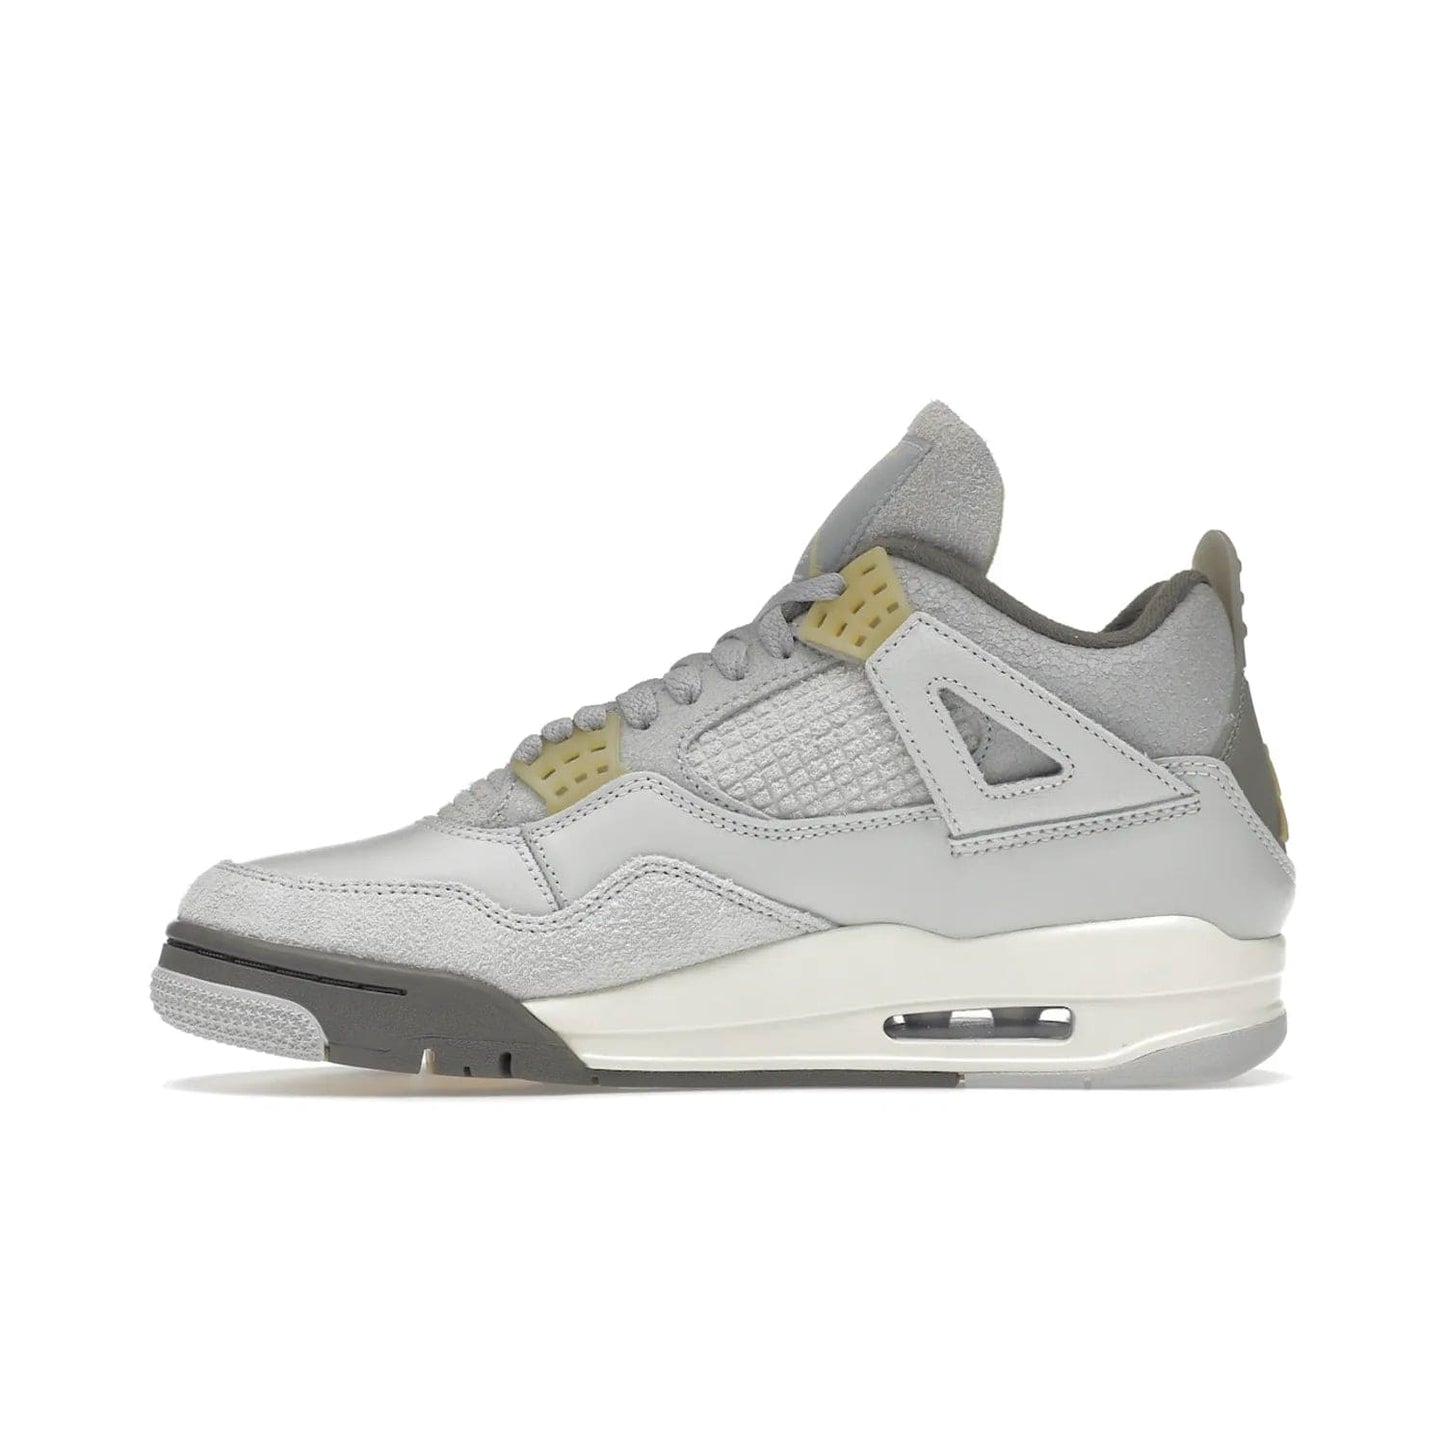 Jordan 4 Retro SE Craft Photon Dust - Image 19 - Only at www.BallersClubKickz.com - Upgrade your shoe collection with the Air Jordan 4 Retro SE Craft Photon Dust. This luxurious sneaker features a combination of suede and leather with unique grey tones like Photon Dust, Pale Vanilla, Off White, Grey Fog, Flat Pewter, and Sail. Available February 11, 2023.